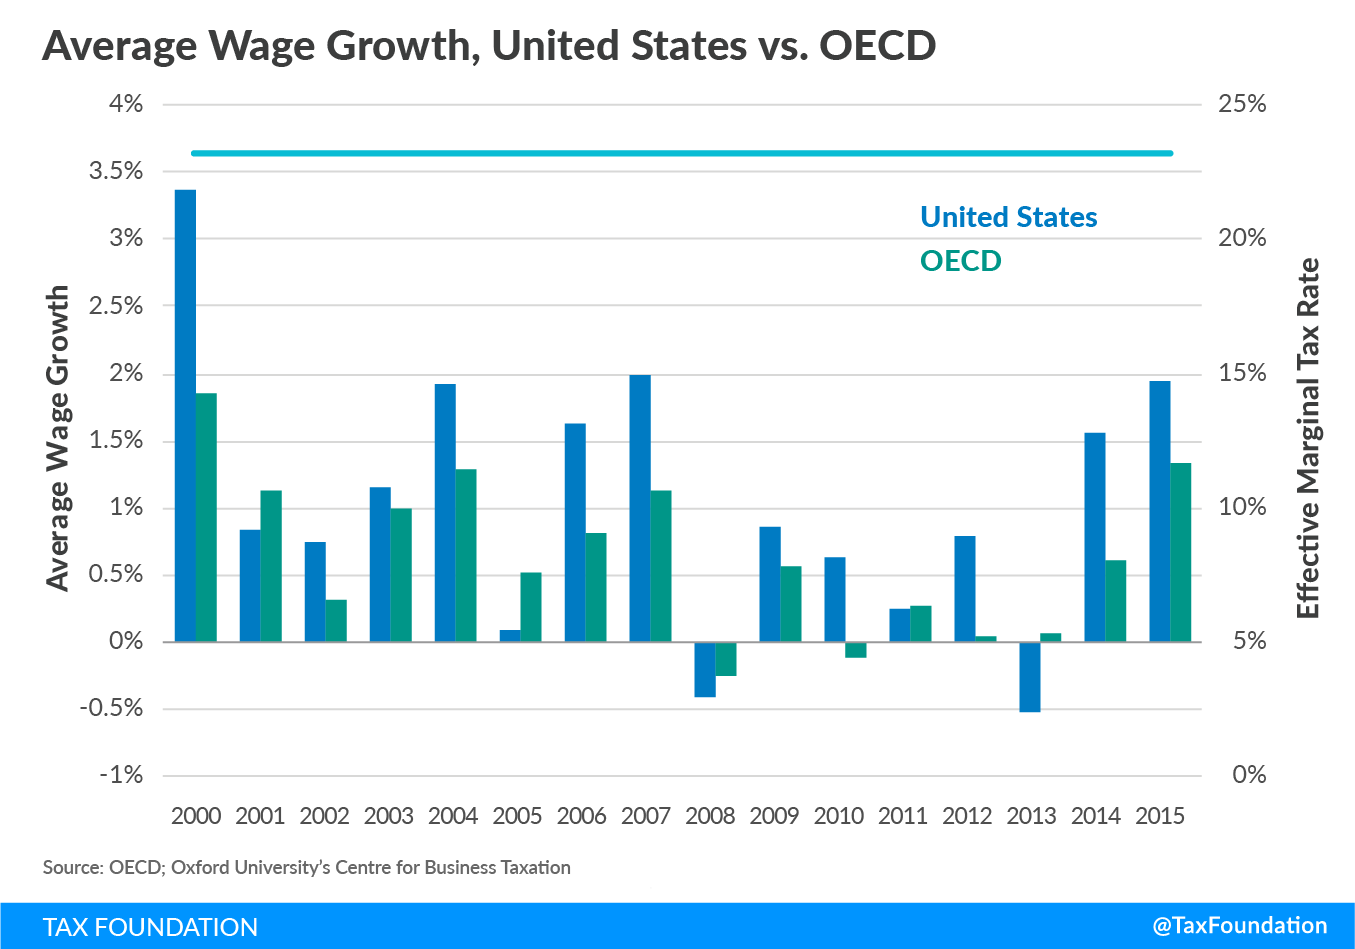 Effective Marginal Tax Rates - United States vs. OECD